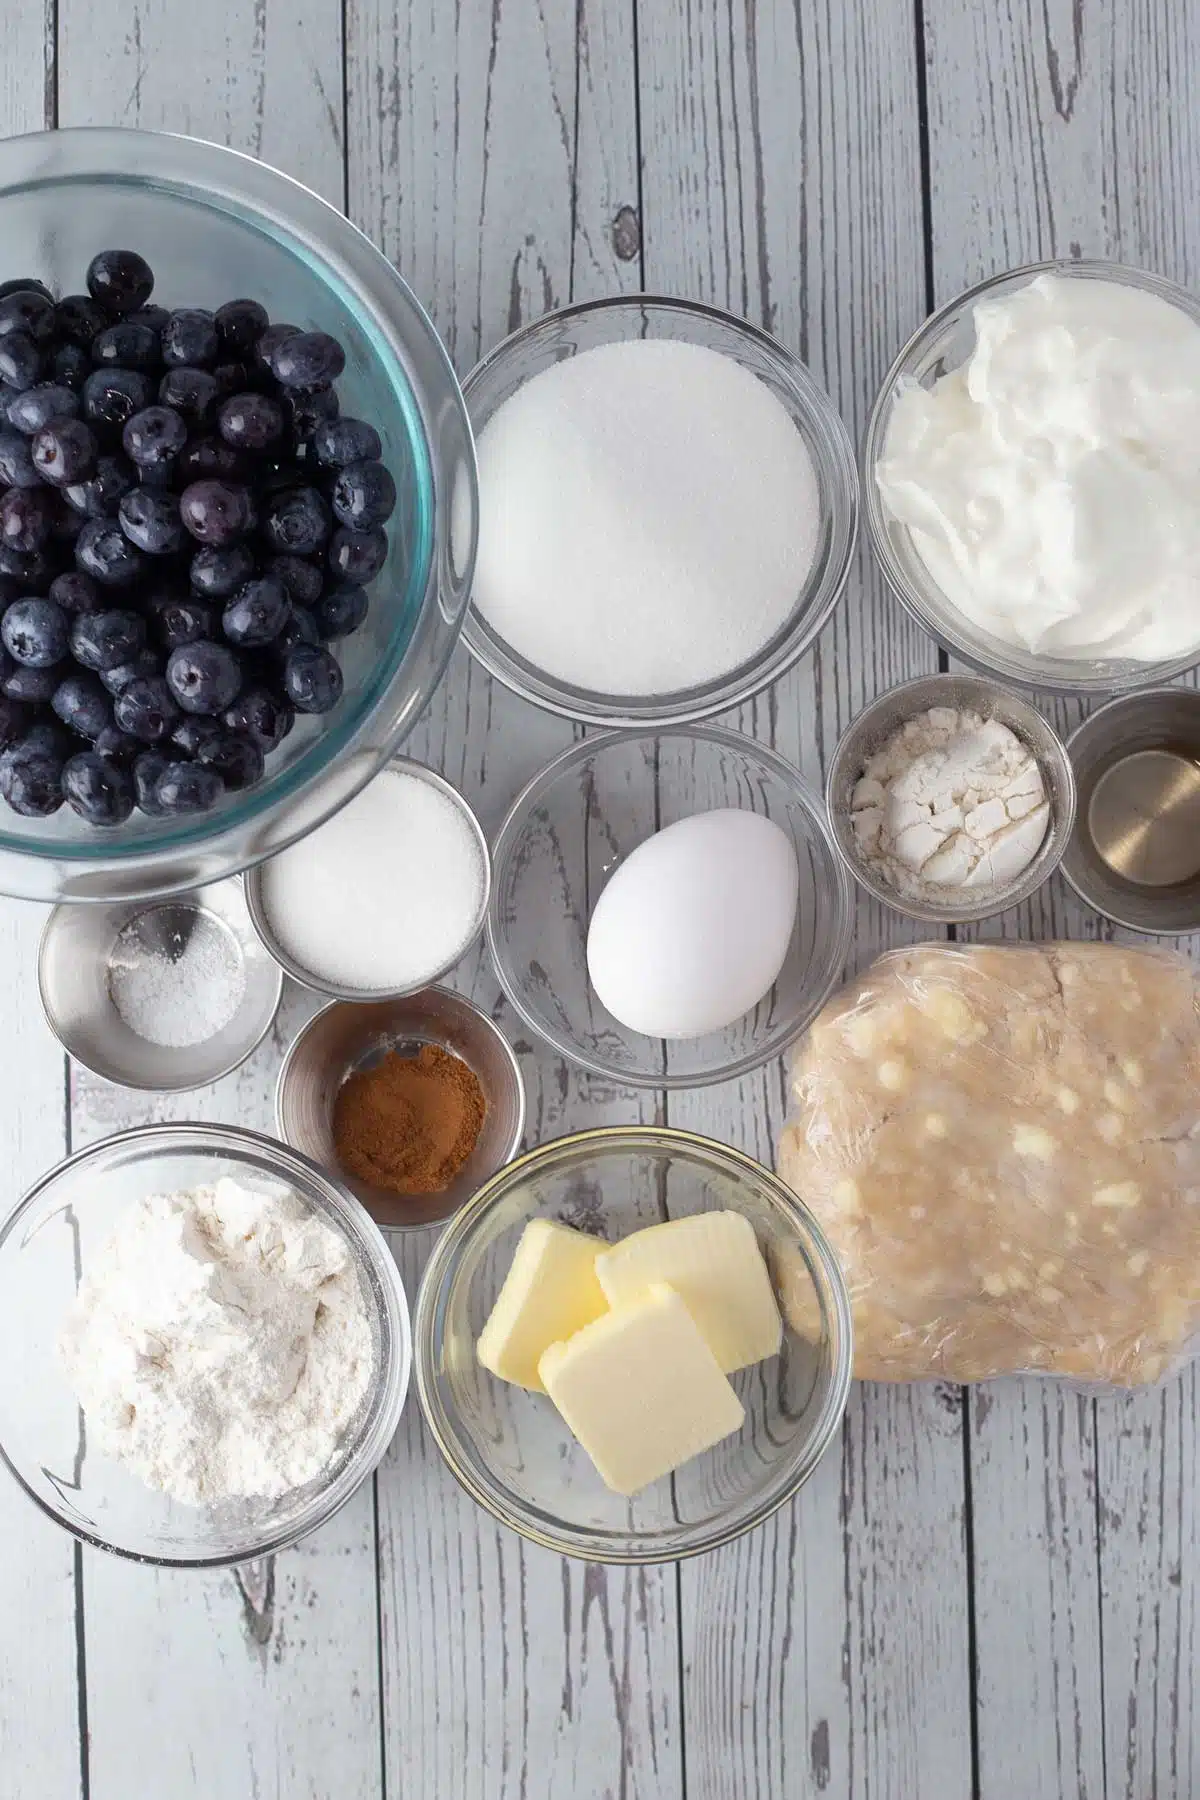 Tall image showing ingredients needed for sour cream blueberry pie.